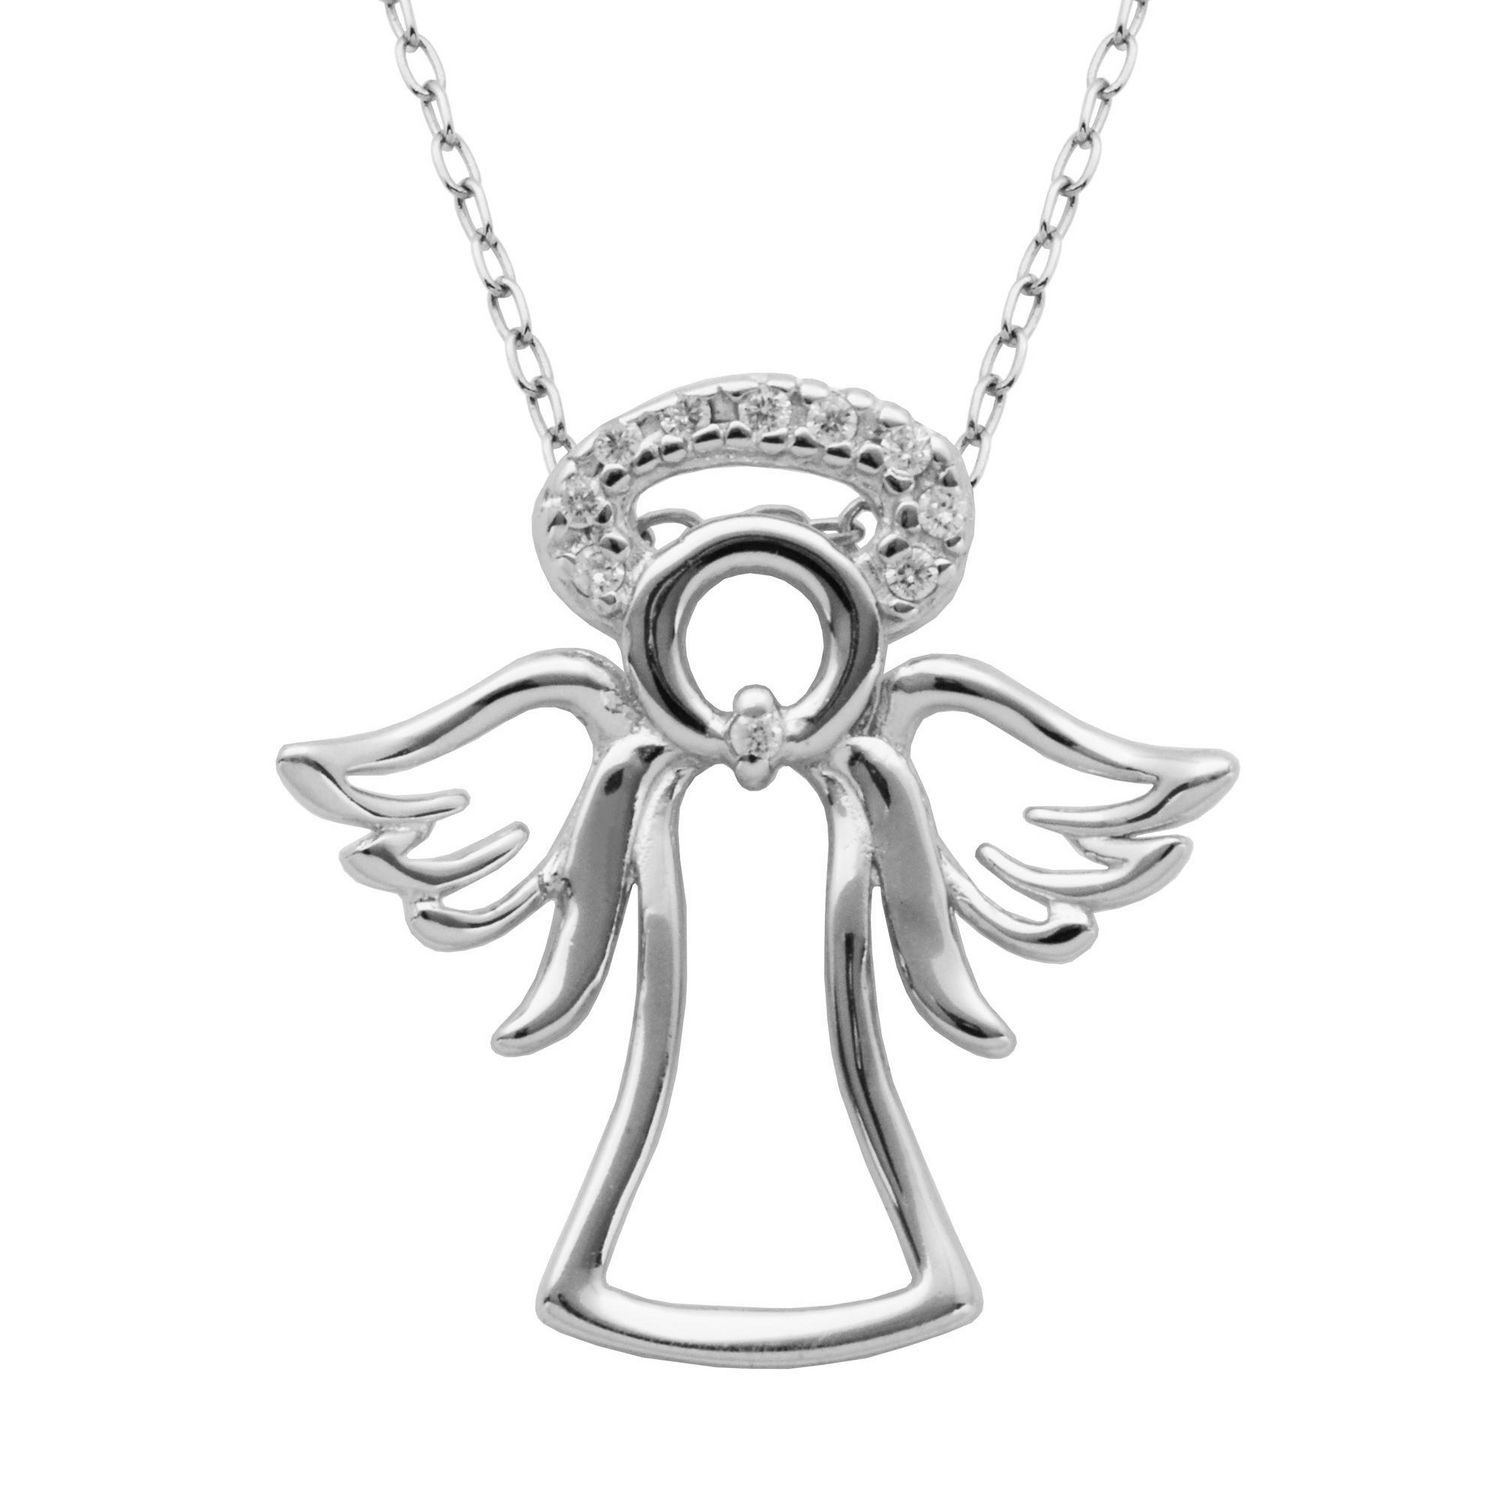 Mireval Sterling Silver Little Angel Charm on a Sterling Silver Chain Necklace 16-20